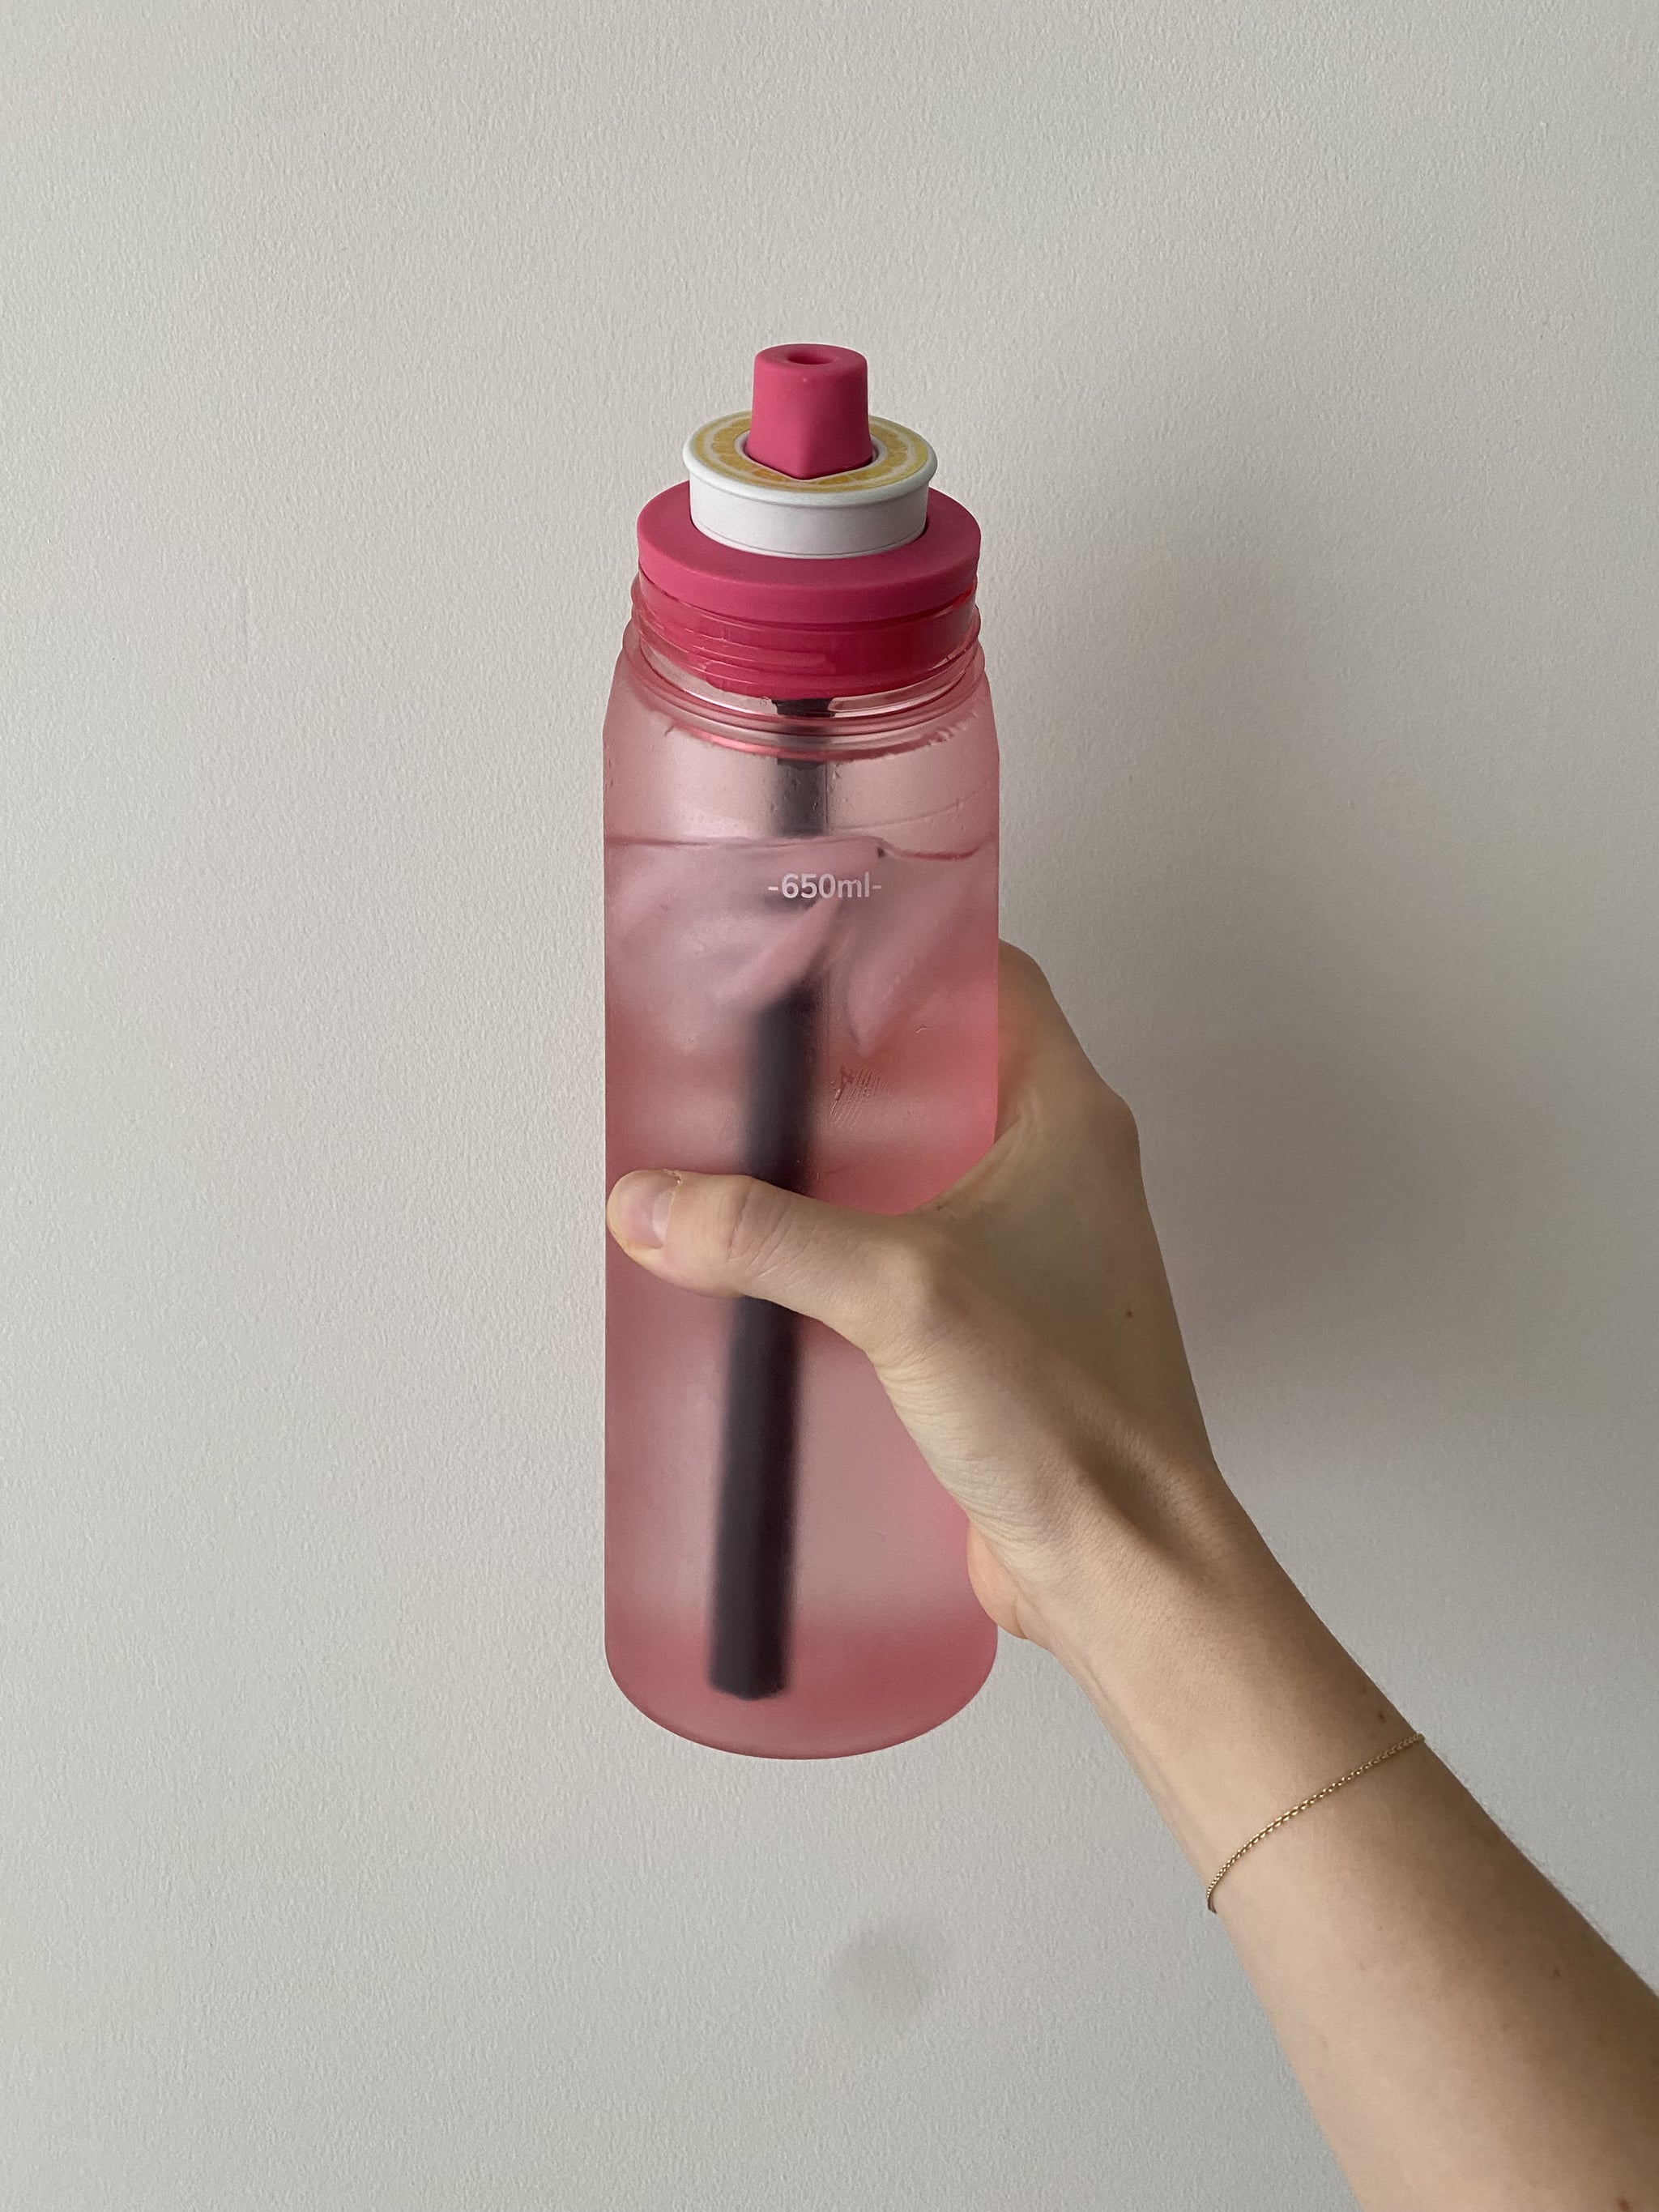 Air Up Water Bottle Review